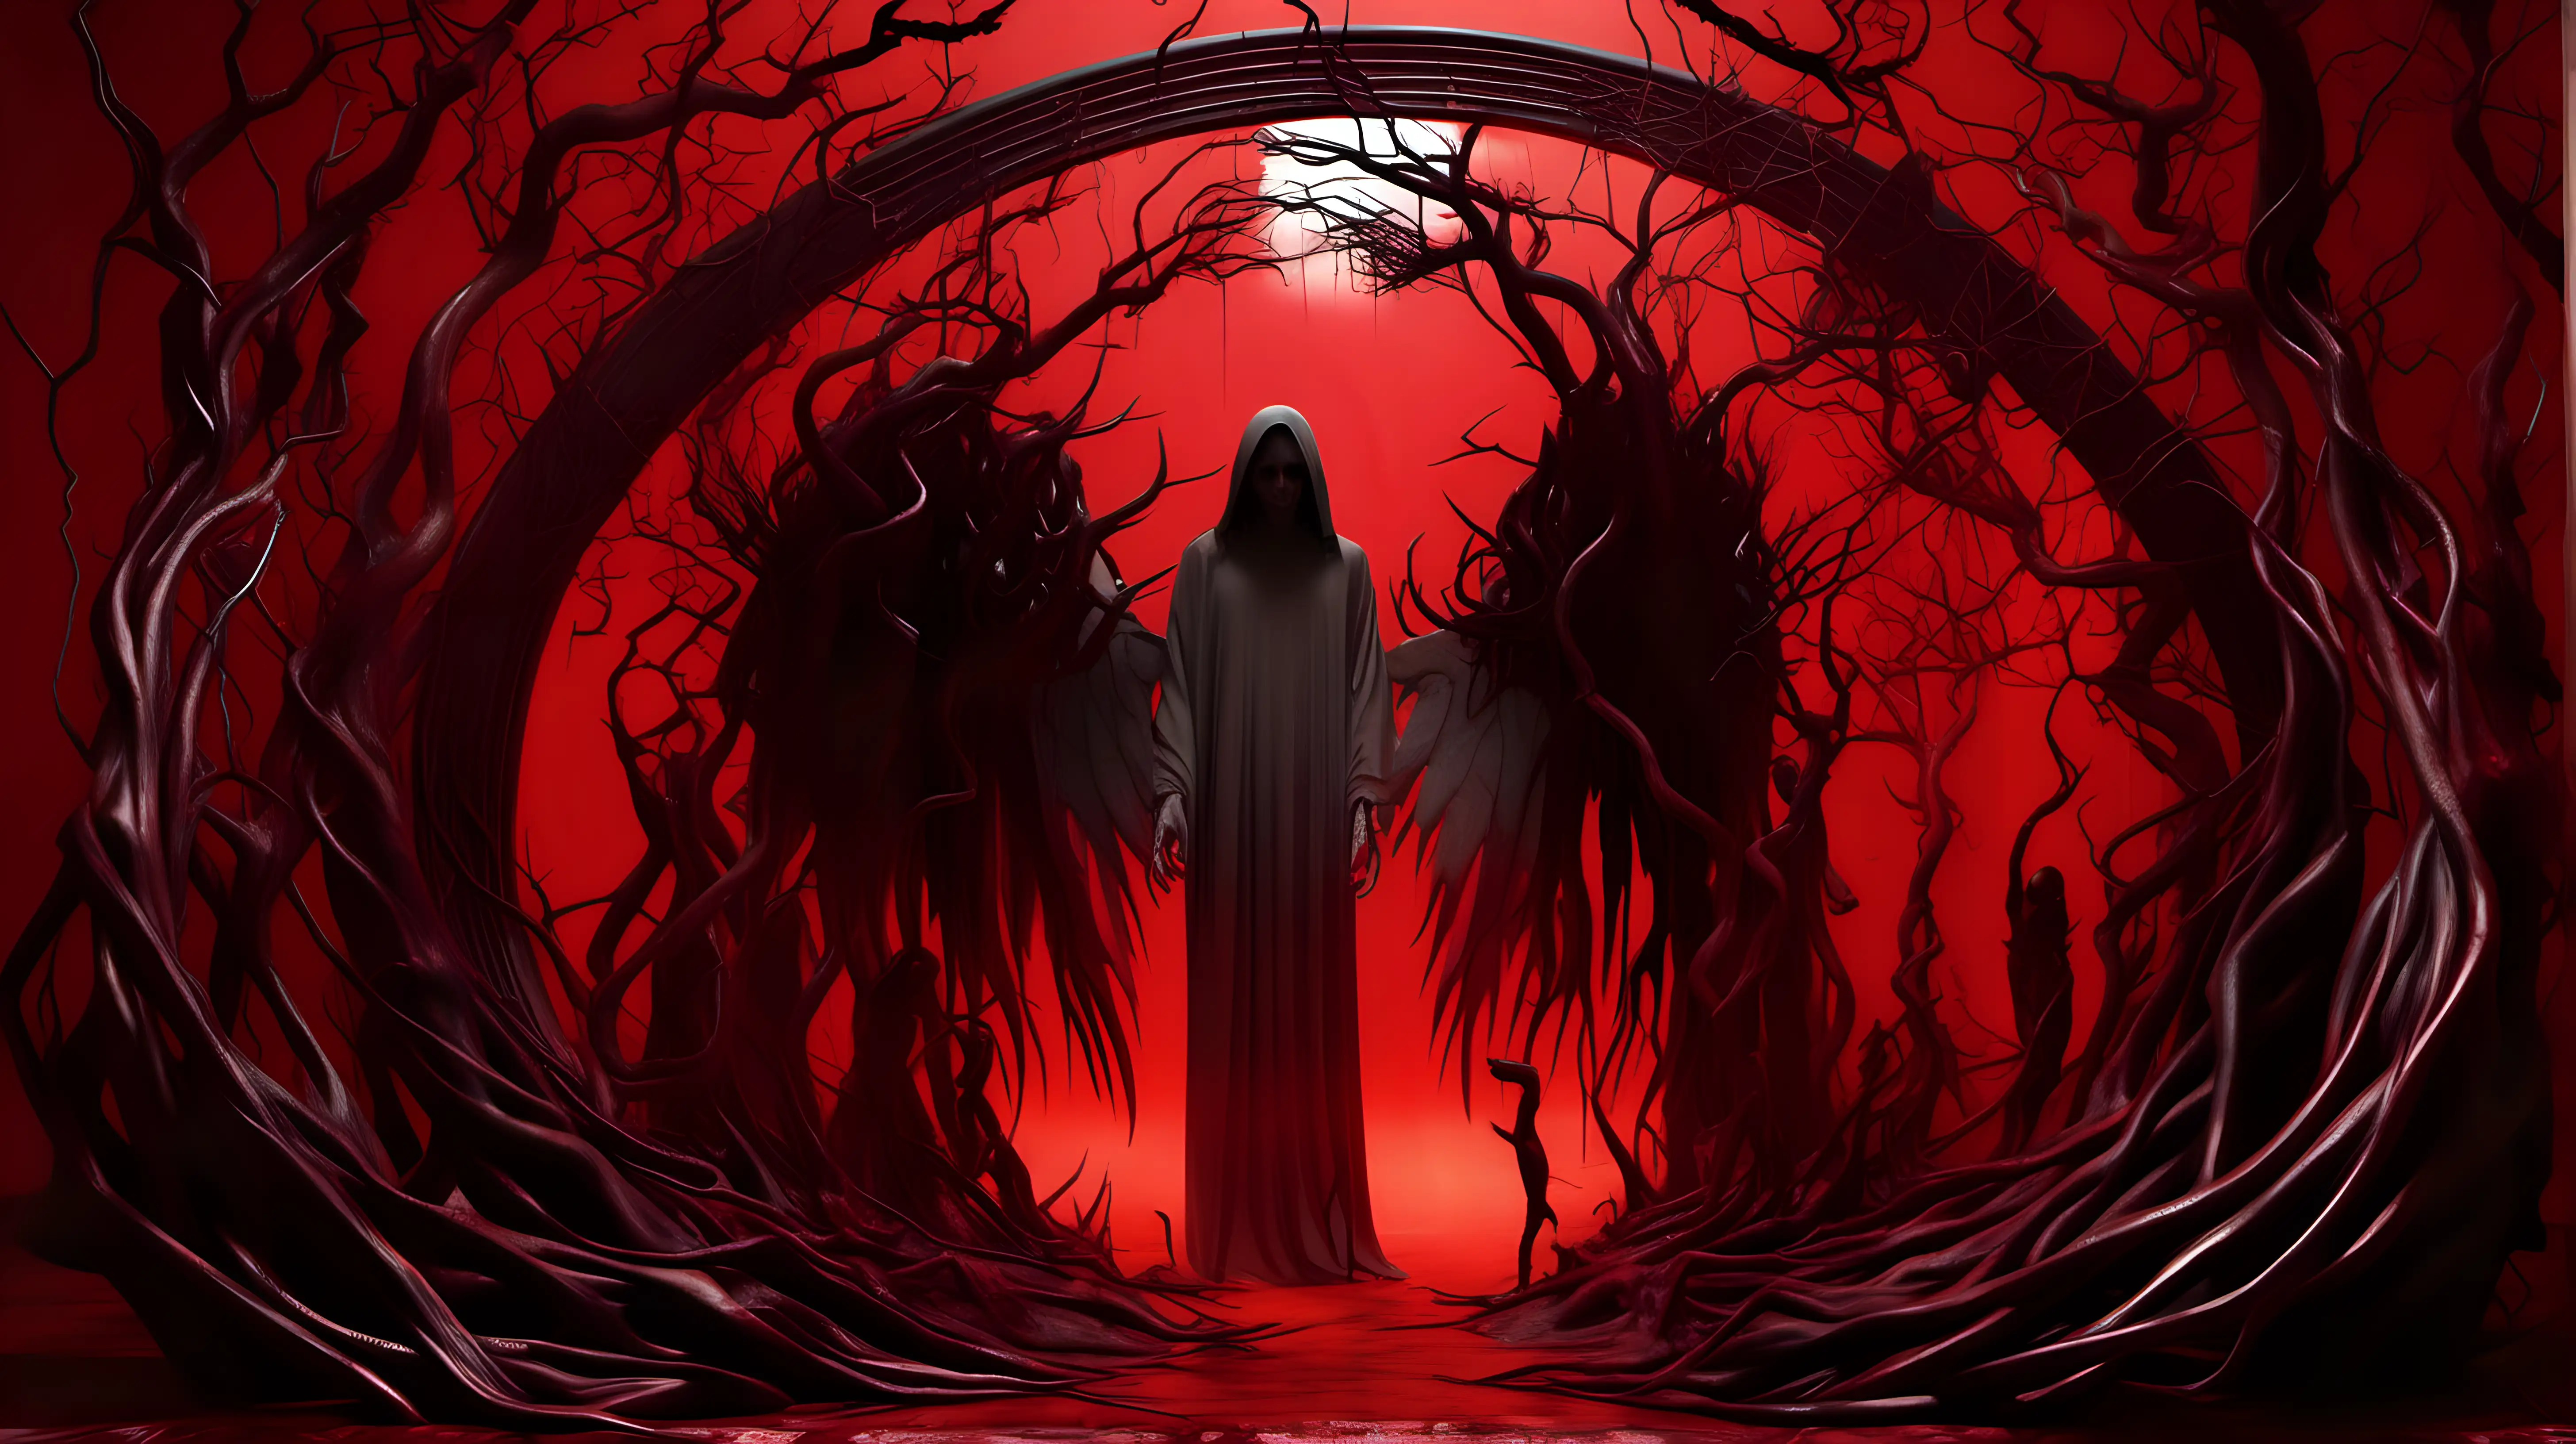 "Create a surreal and unsettling scene of the Angel of Death emerging from a blood-red portal, with twisted branches and demonic figures silhouetted in the background."